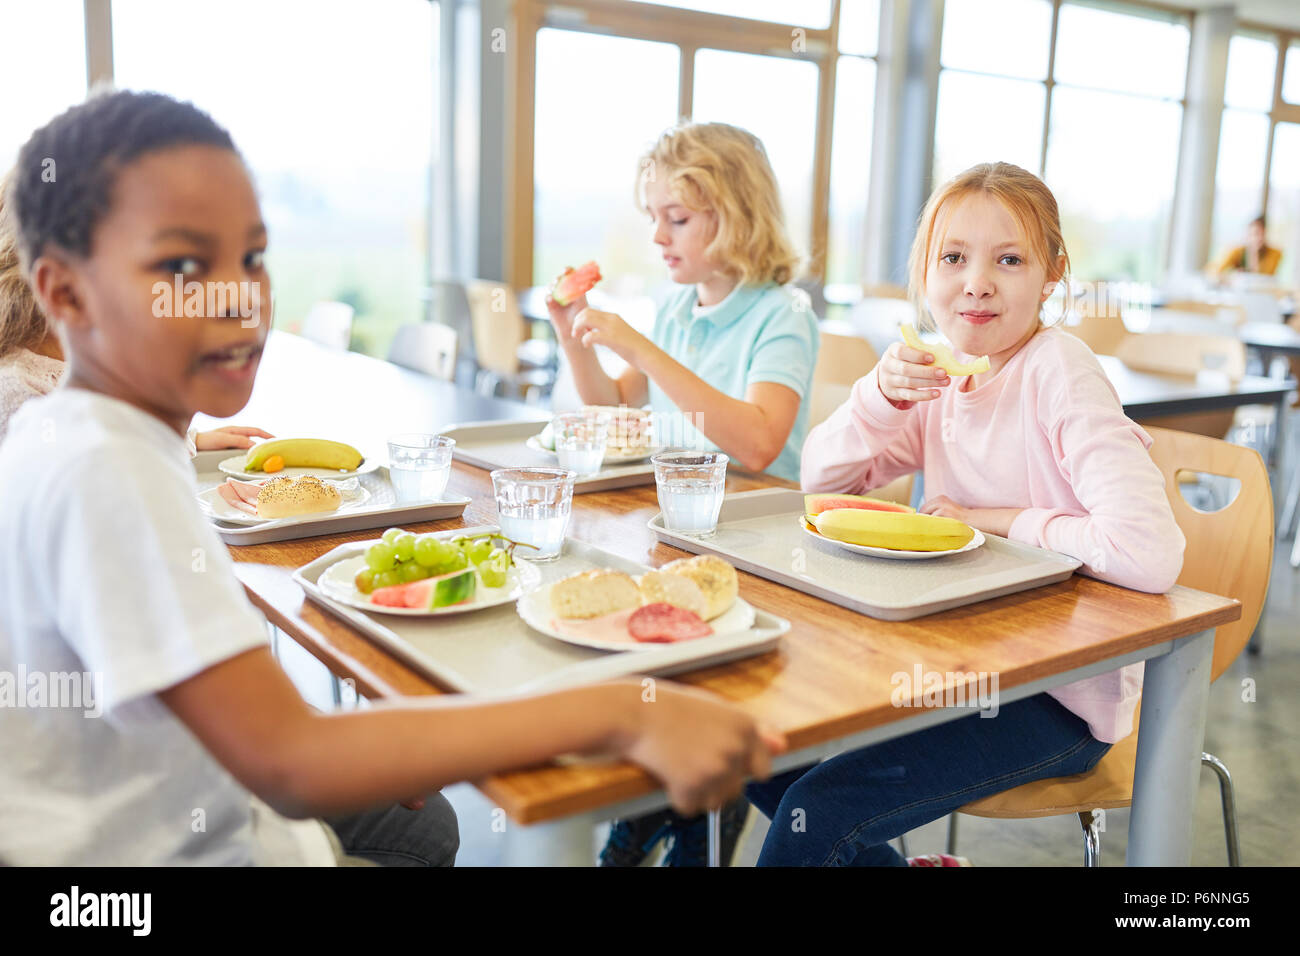 https://c8.alamy.com/comp/P6NNG5/group-of-kids-in-the-canteen-of-the-elementary-school-having-lunch-P6NNG5.jpg